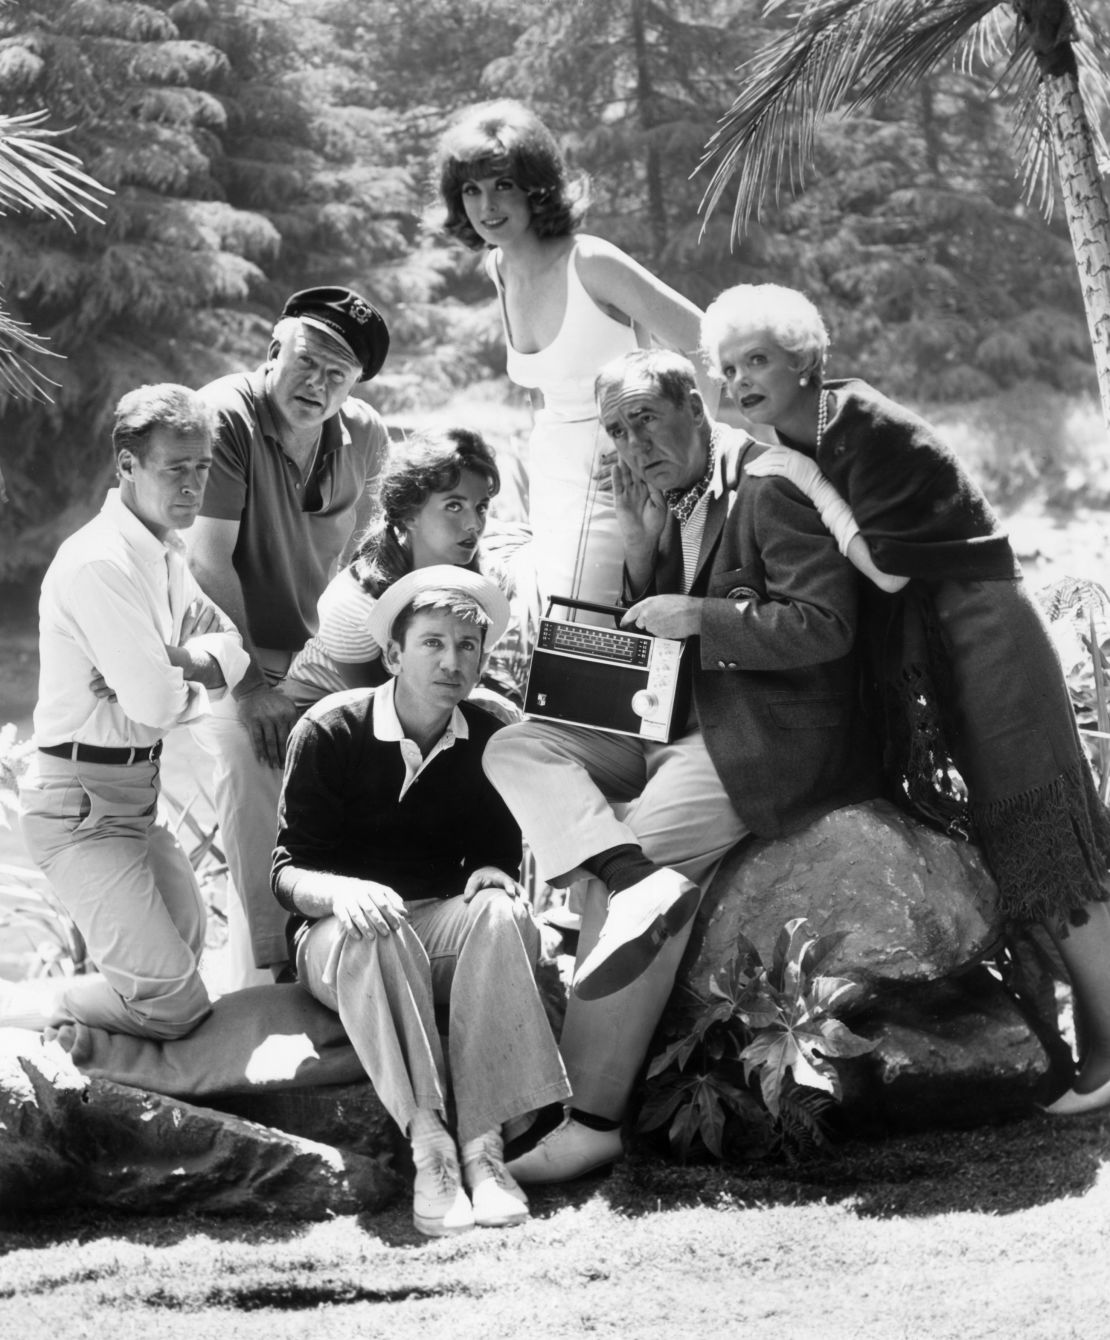 The cast of the TV comedy series "Gilligan's Island," which ran from 1964-1967, listens to a shortwave radio in a promotional photo.